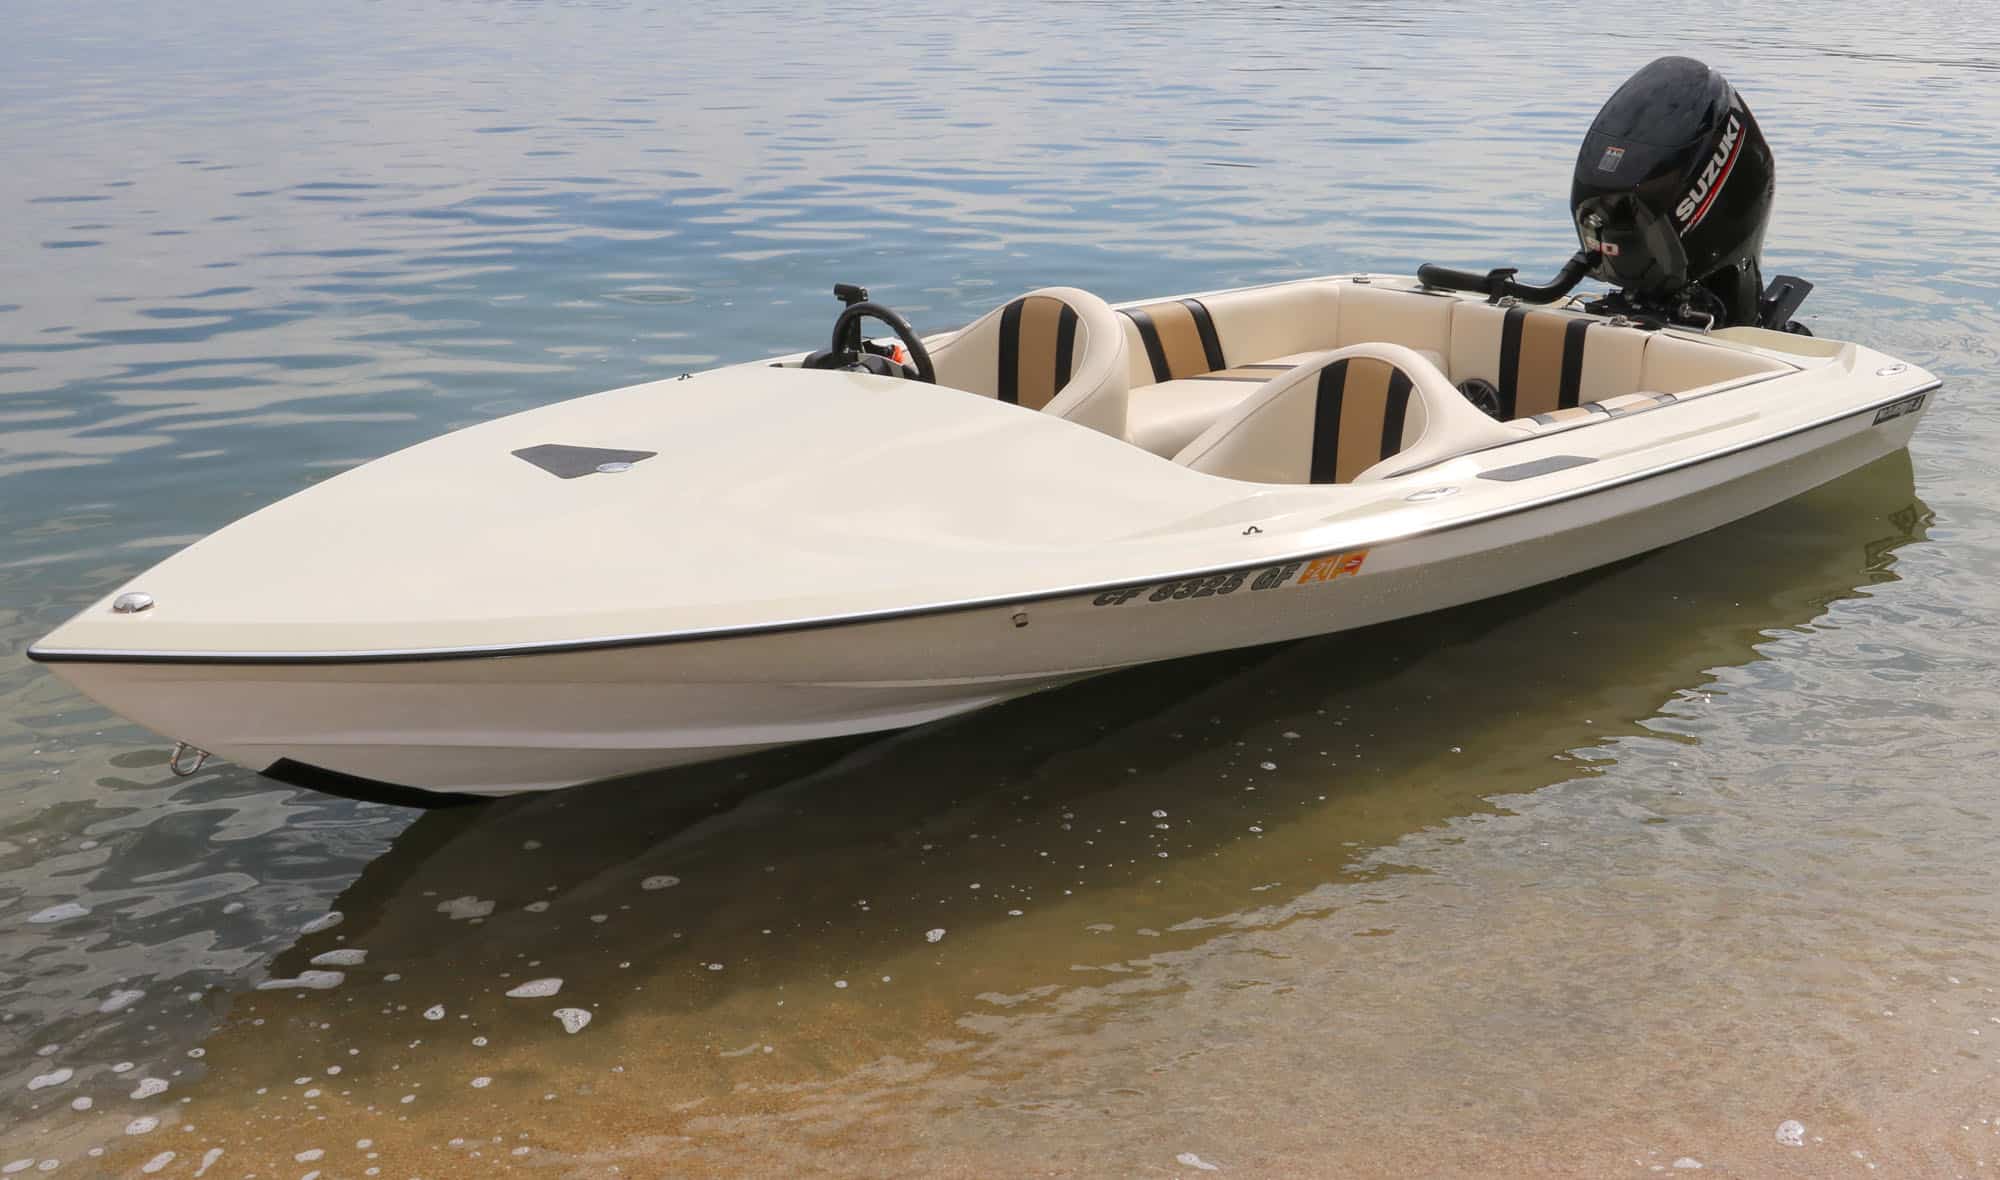 Calculate How Much Vinyl You Need To Re-Upholster Your Boat